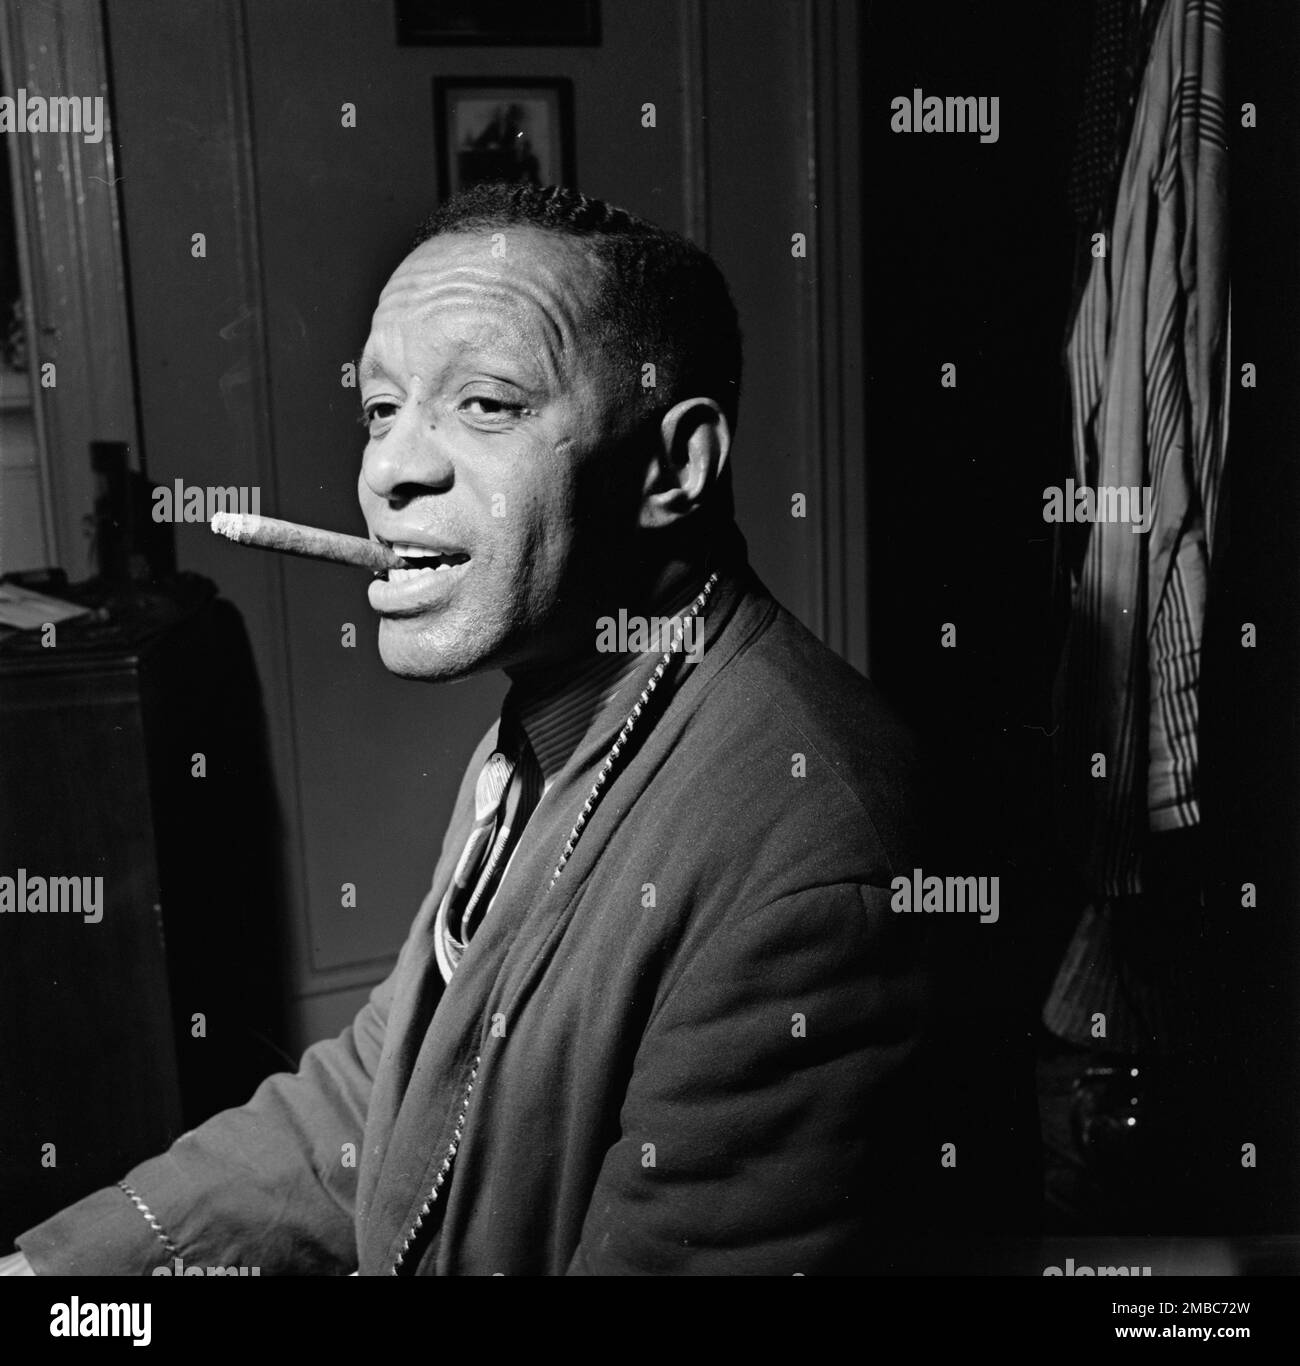 Portrait of Willie Smith in his apartment, Manhattan, New York, N.Y., ca. Jan. 1947. Stock Photo